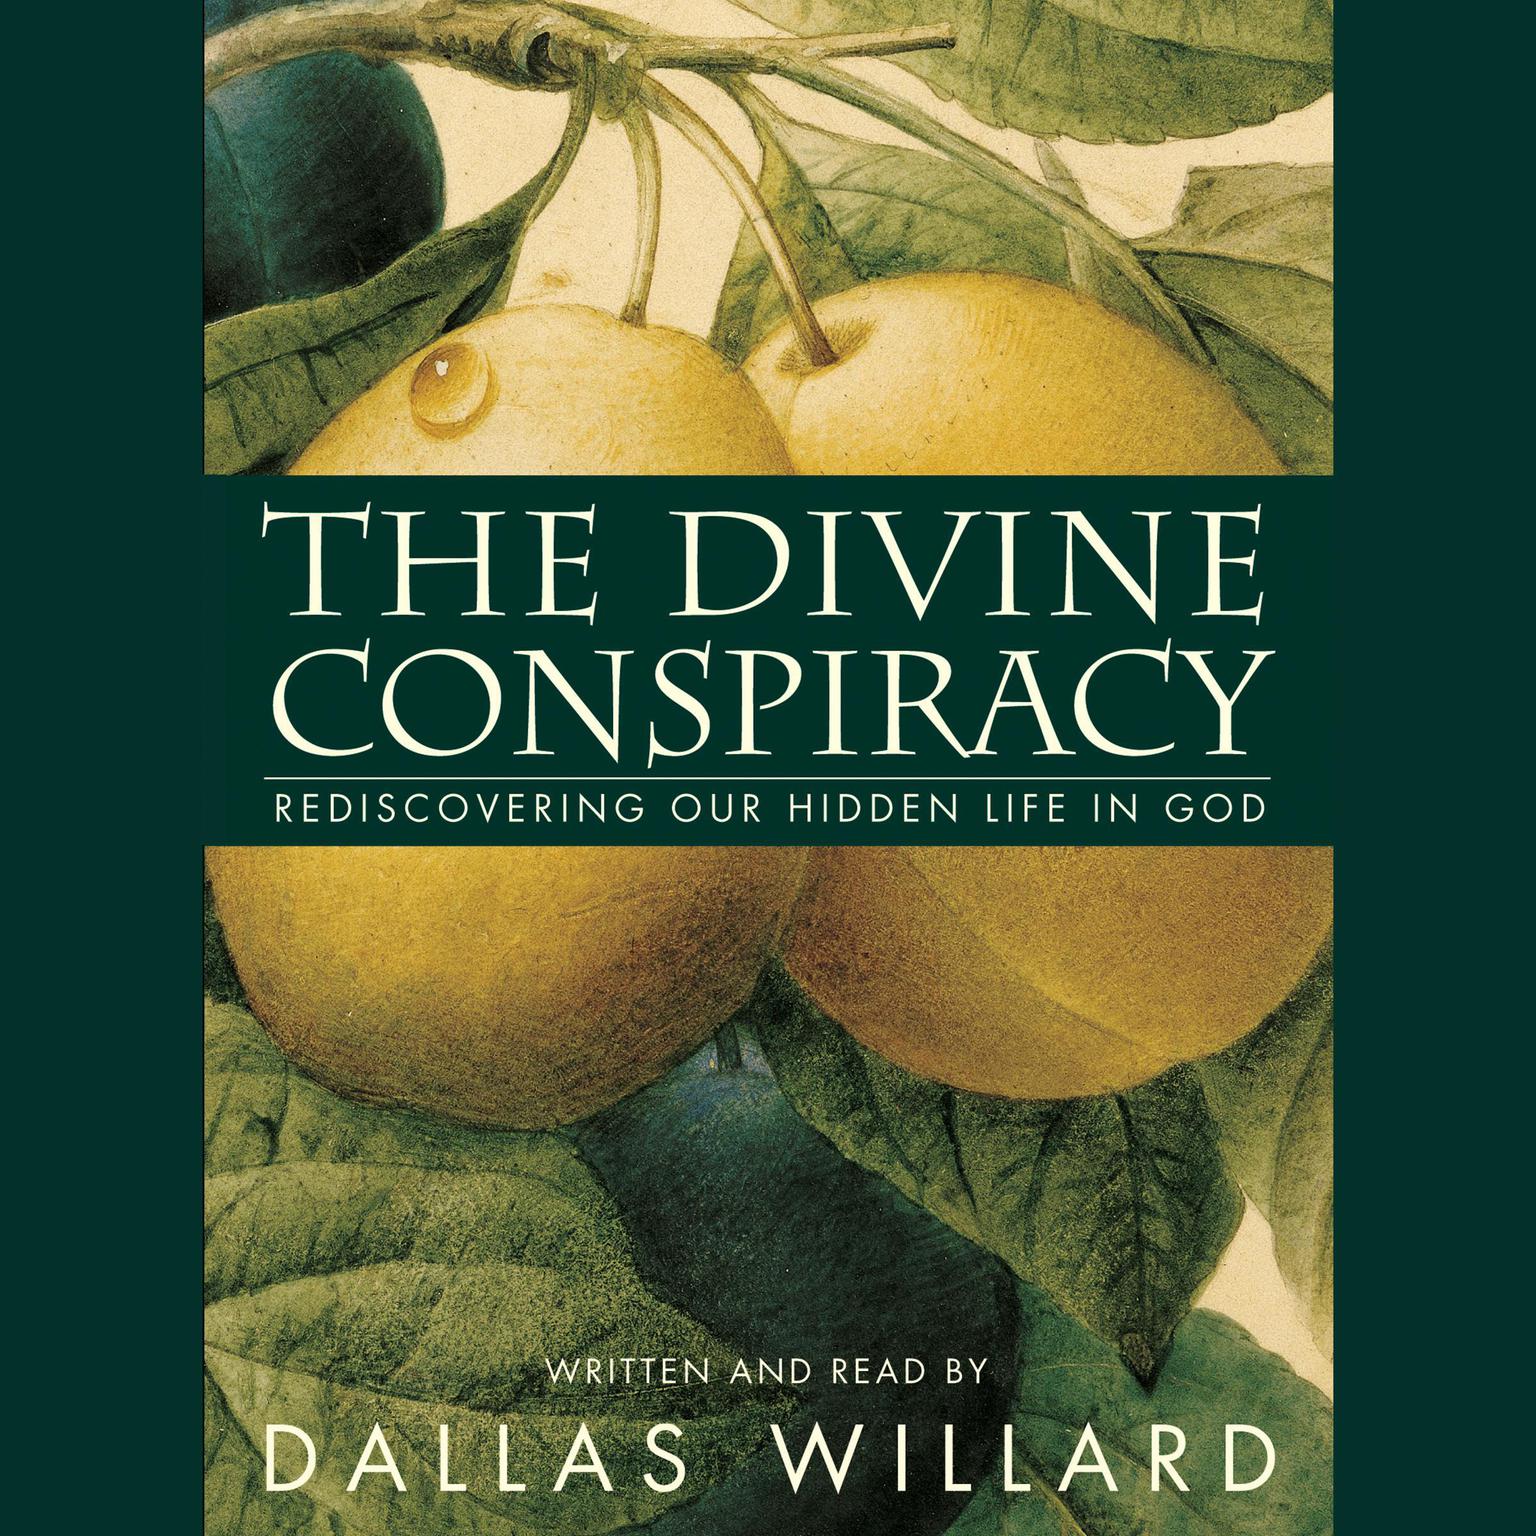 The Divine Conspiracy (Abridged): Rediscovering Our Hidden Life in God Audiobook, by Dallas Willard